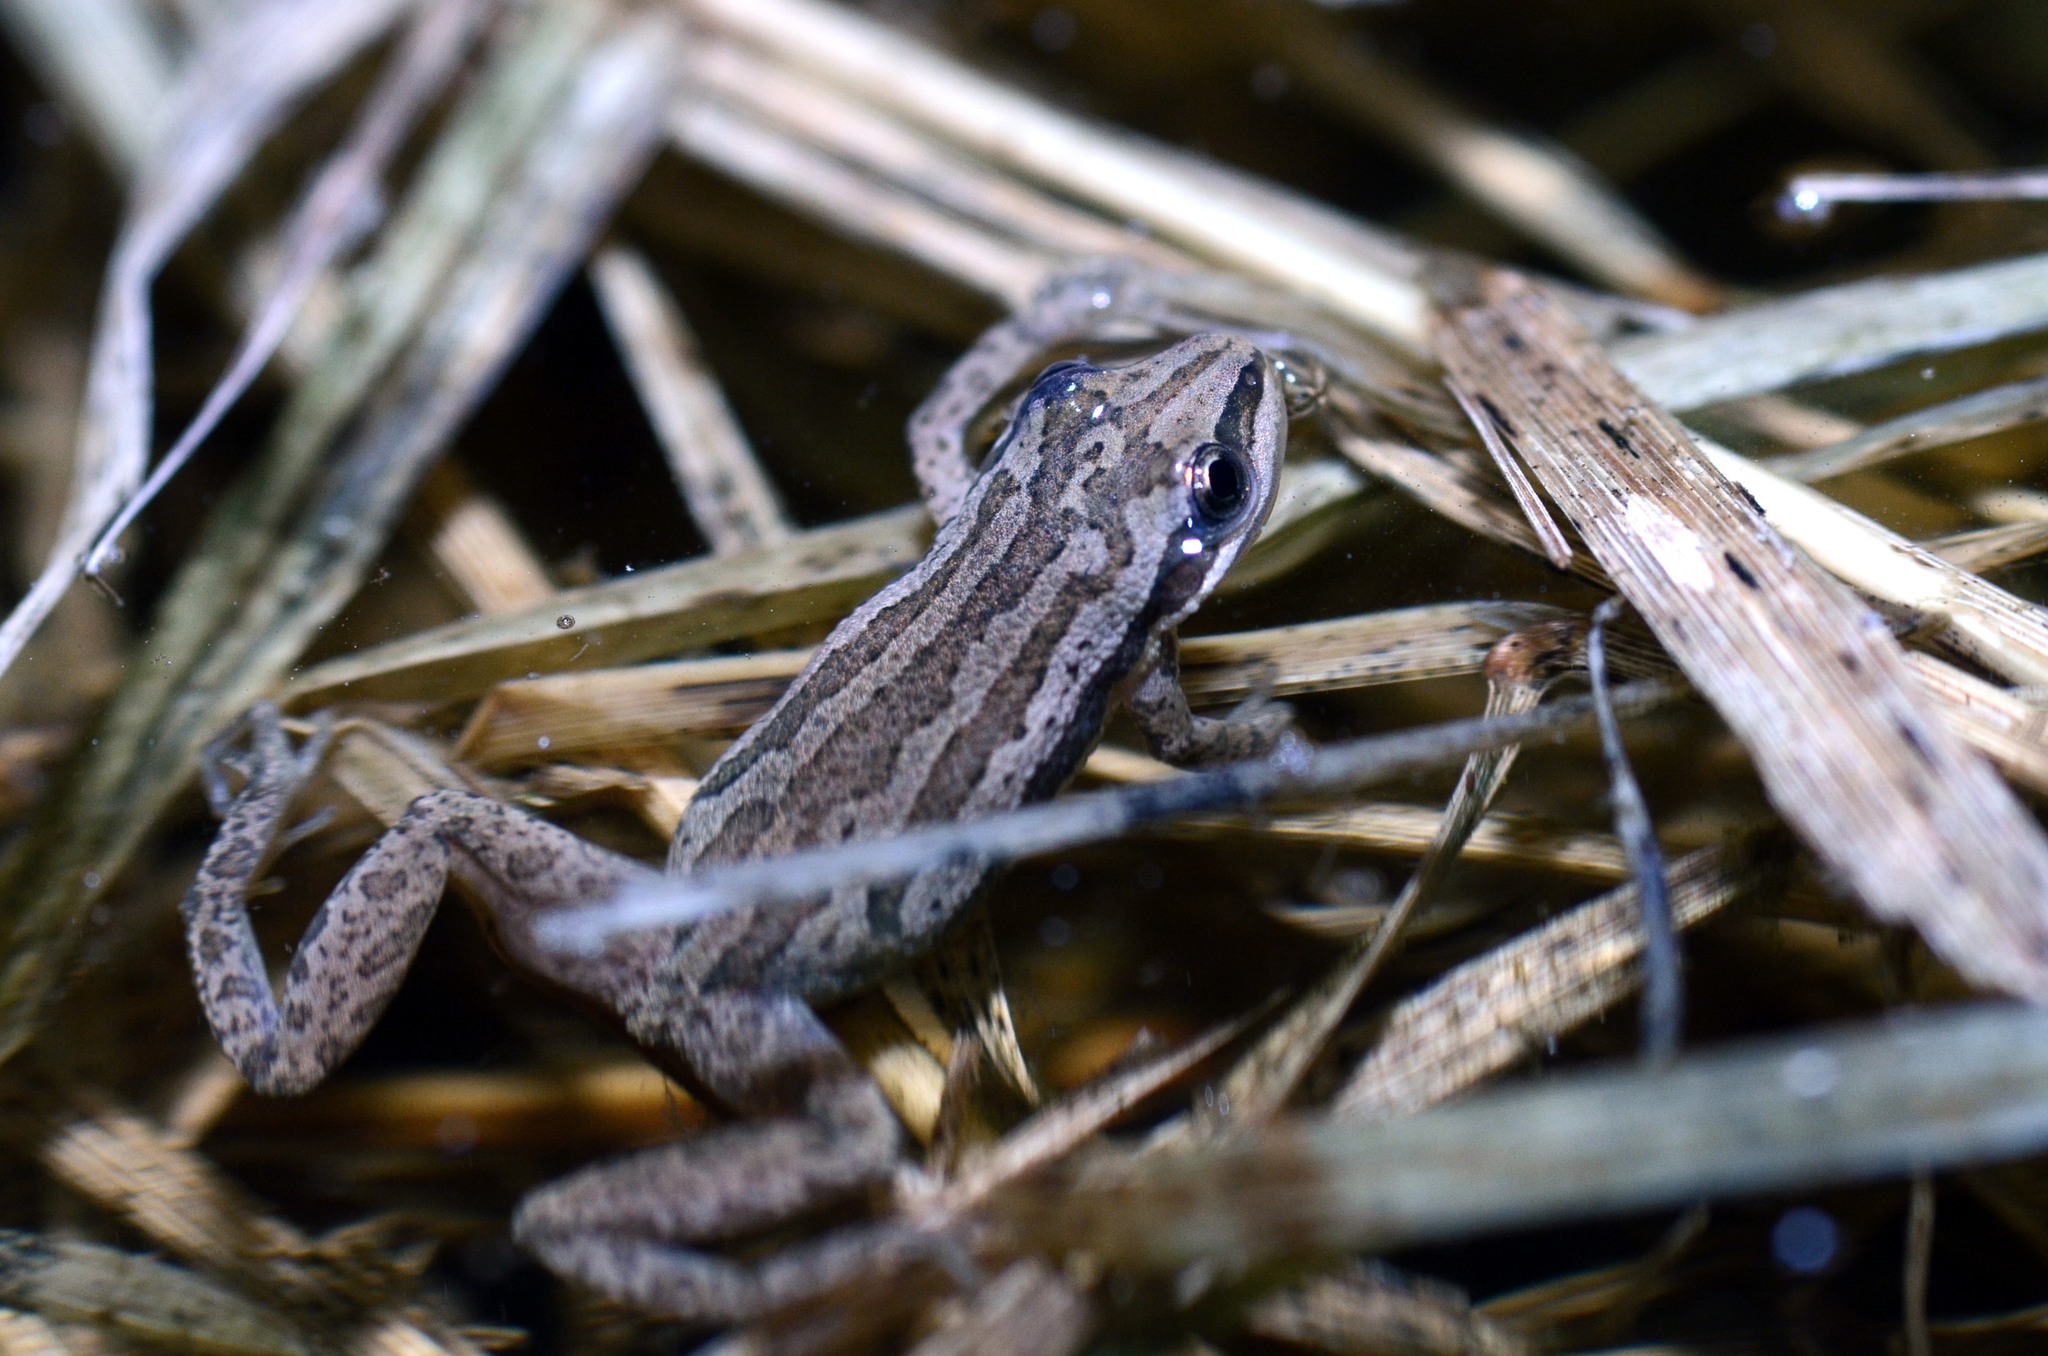 A boreal chorus frog with its head above water, resting on partially submerged vegetation.